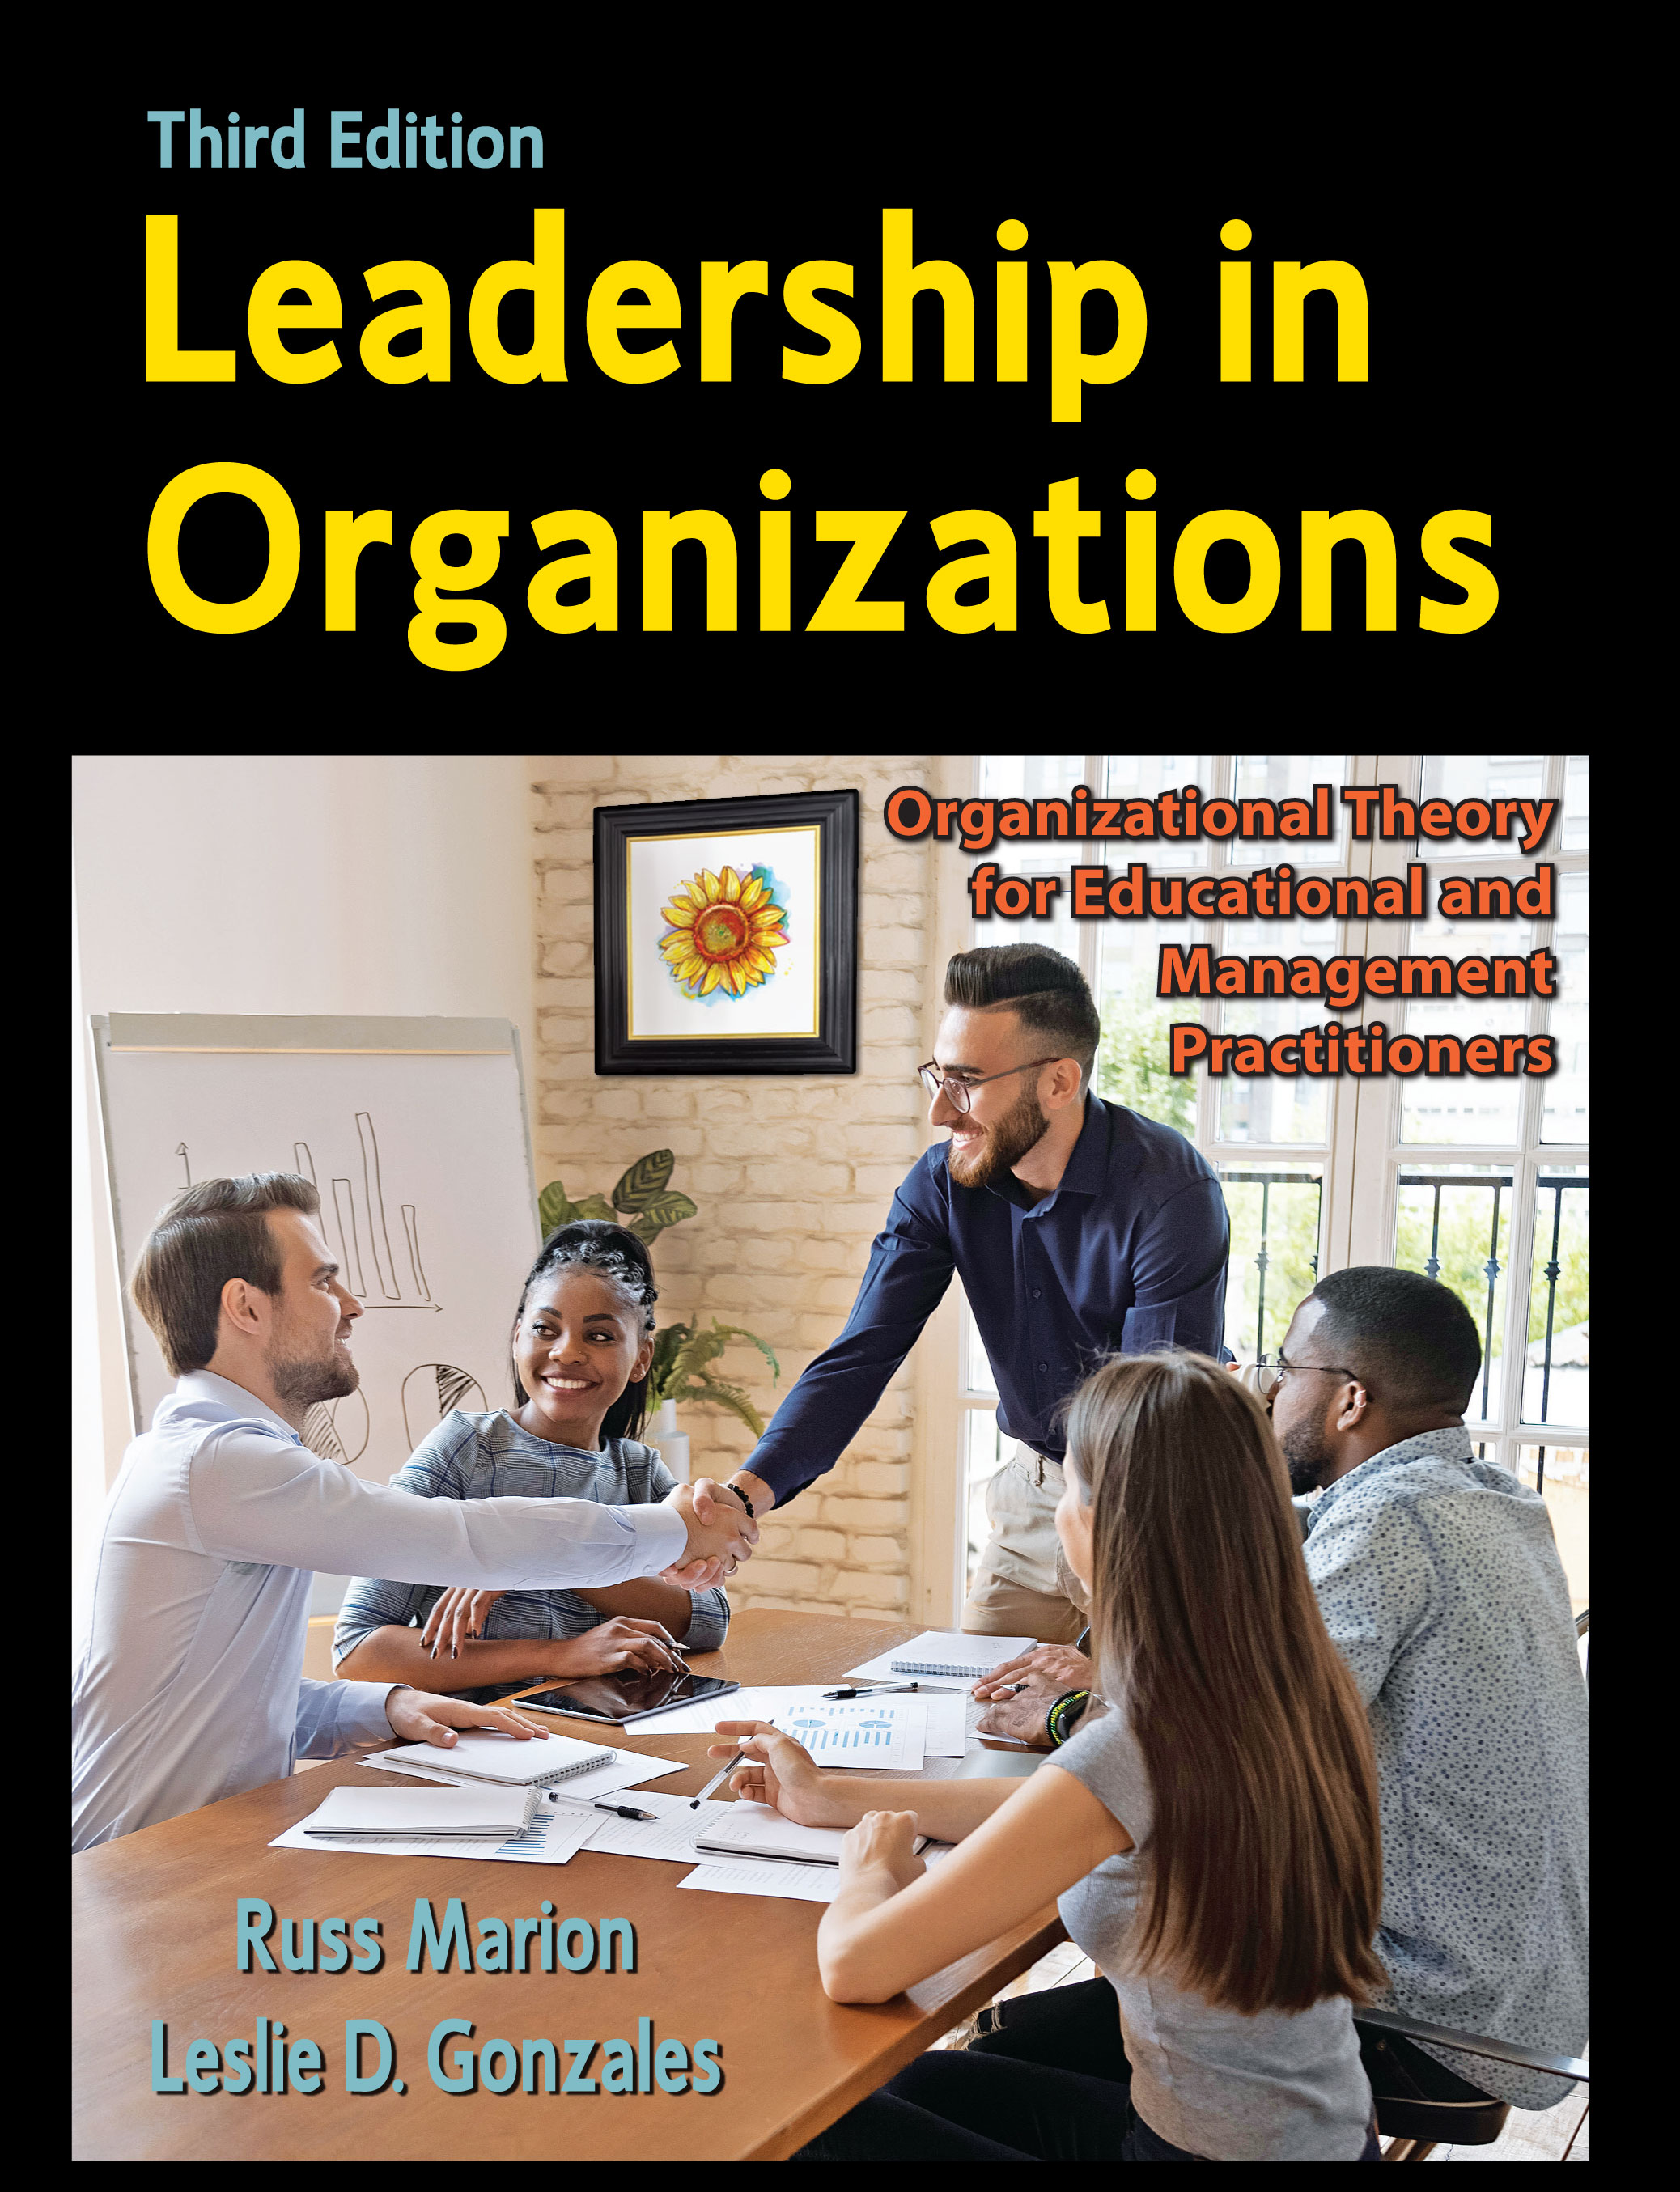 Leadership in Organizations: Organizational Theory for Educational and Management Practitioners, Third Edition by Russ  Marion, Leslie D. Gonzales